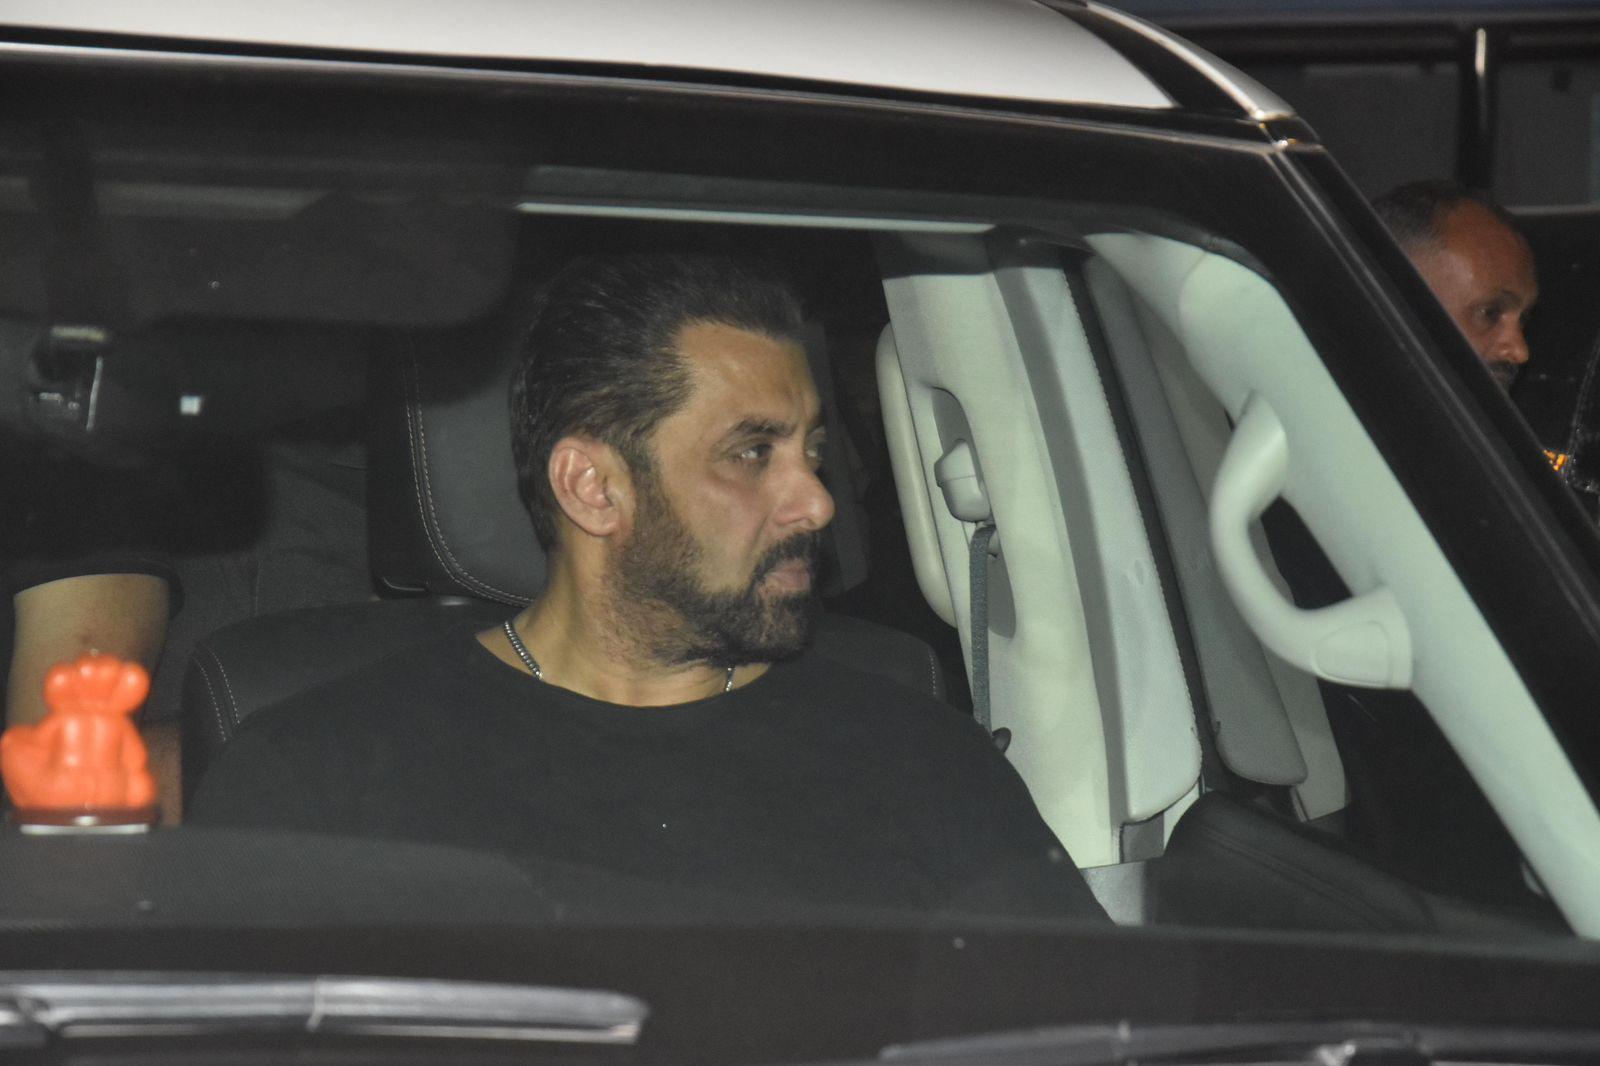 Salman Khan showed up to celebrate his dear brother's birthday